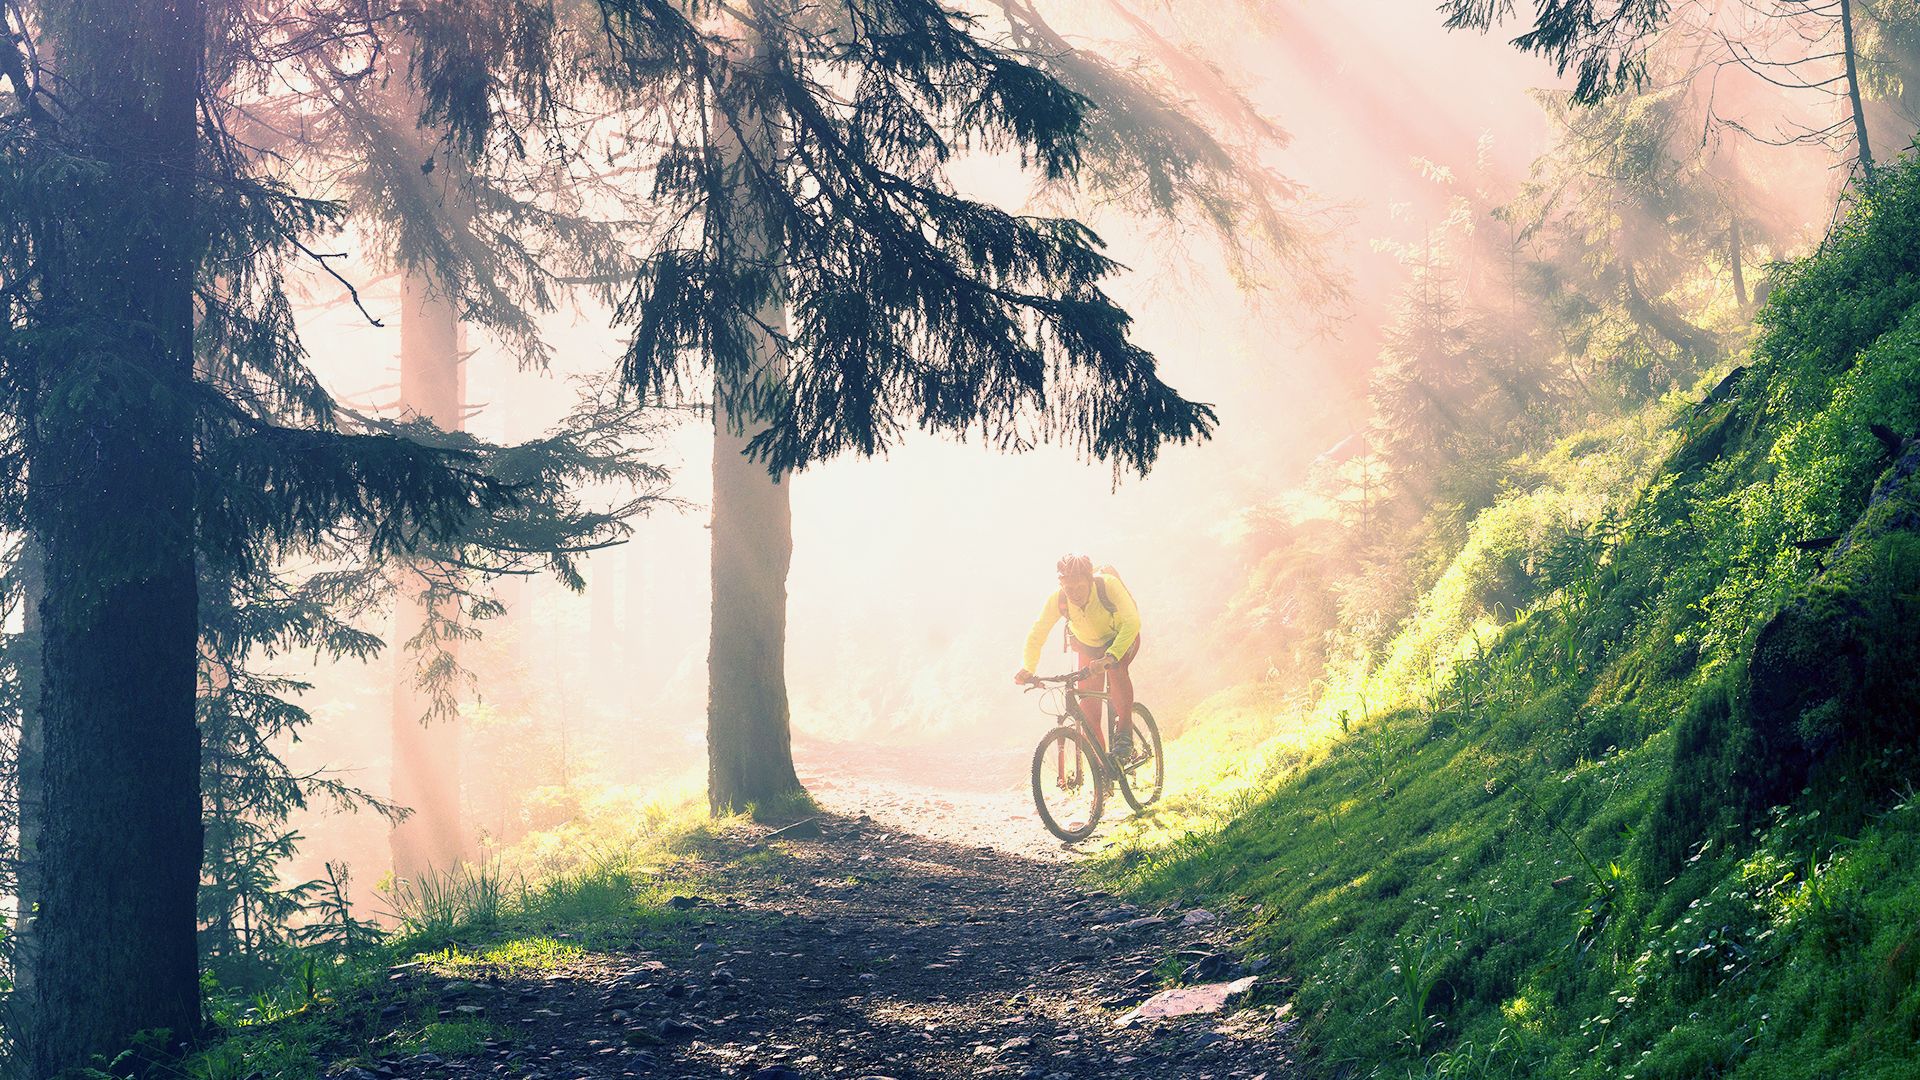 A mountain biker in the forest with the sunlight coming through the trees